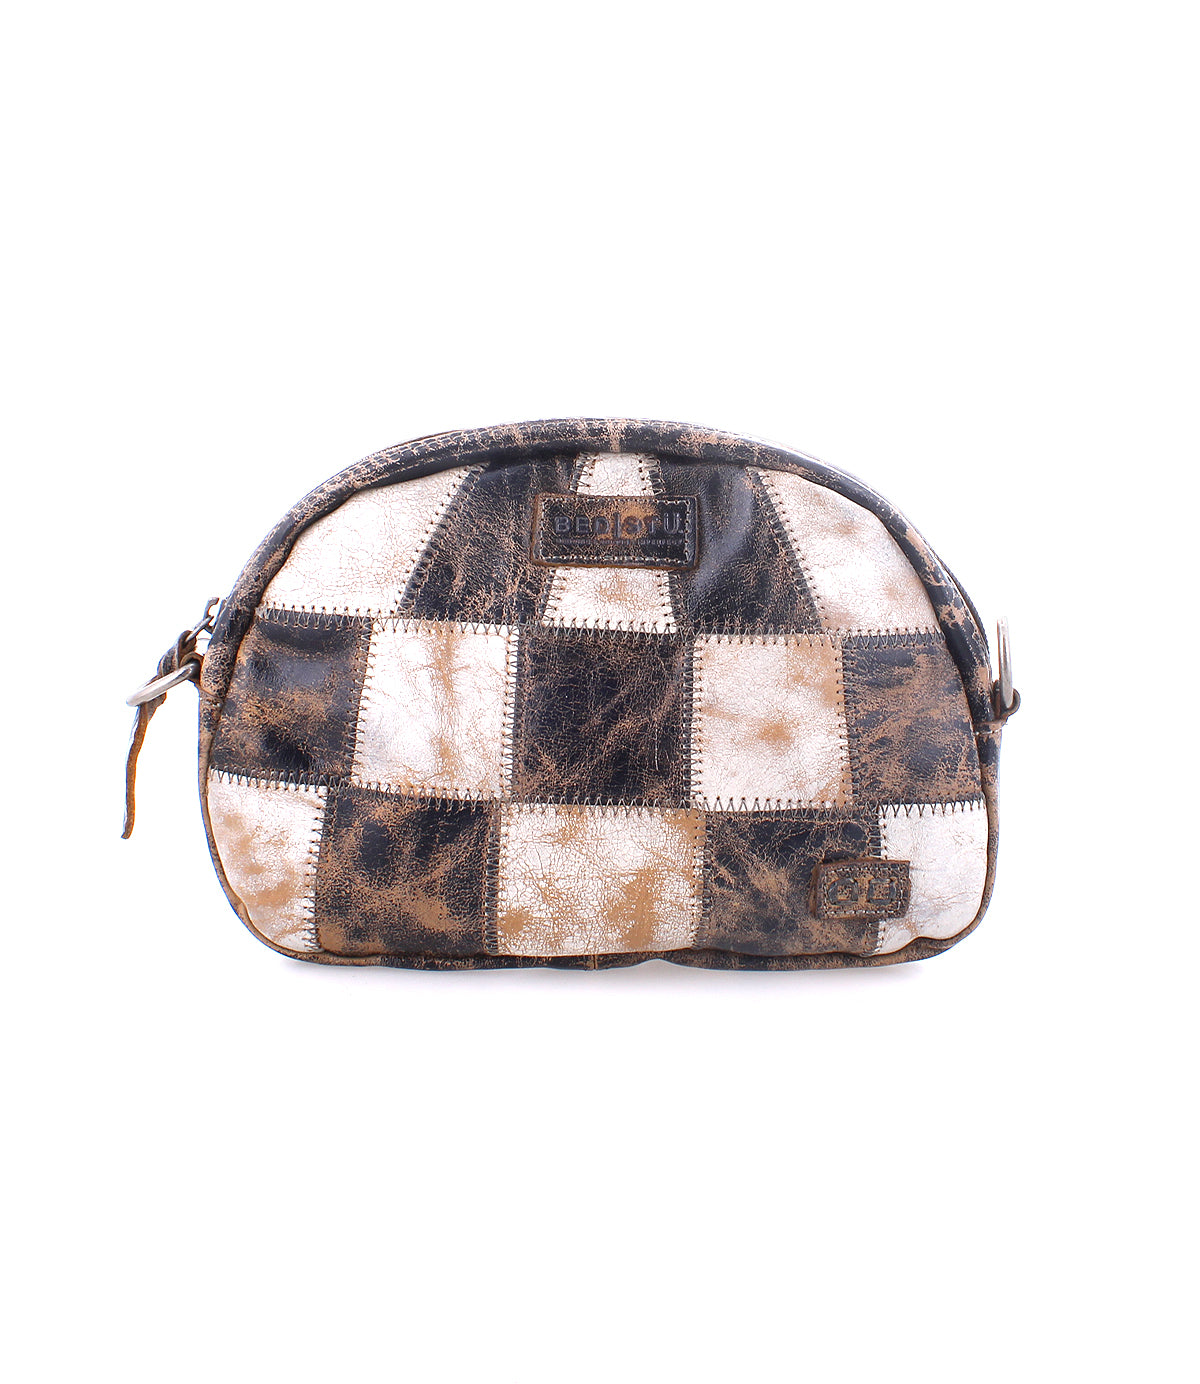 A worn-out, checkered patterned Bed Stu Abundance sling bag with a visible brand label, isolated on a white background.